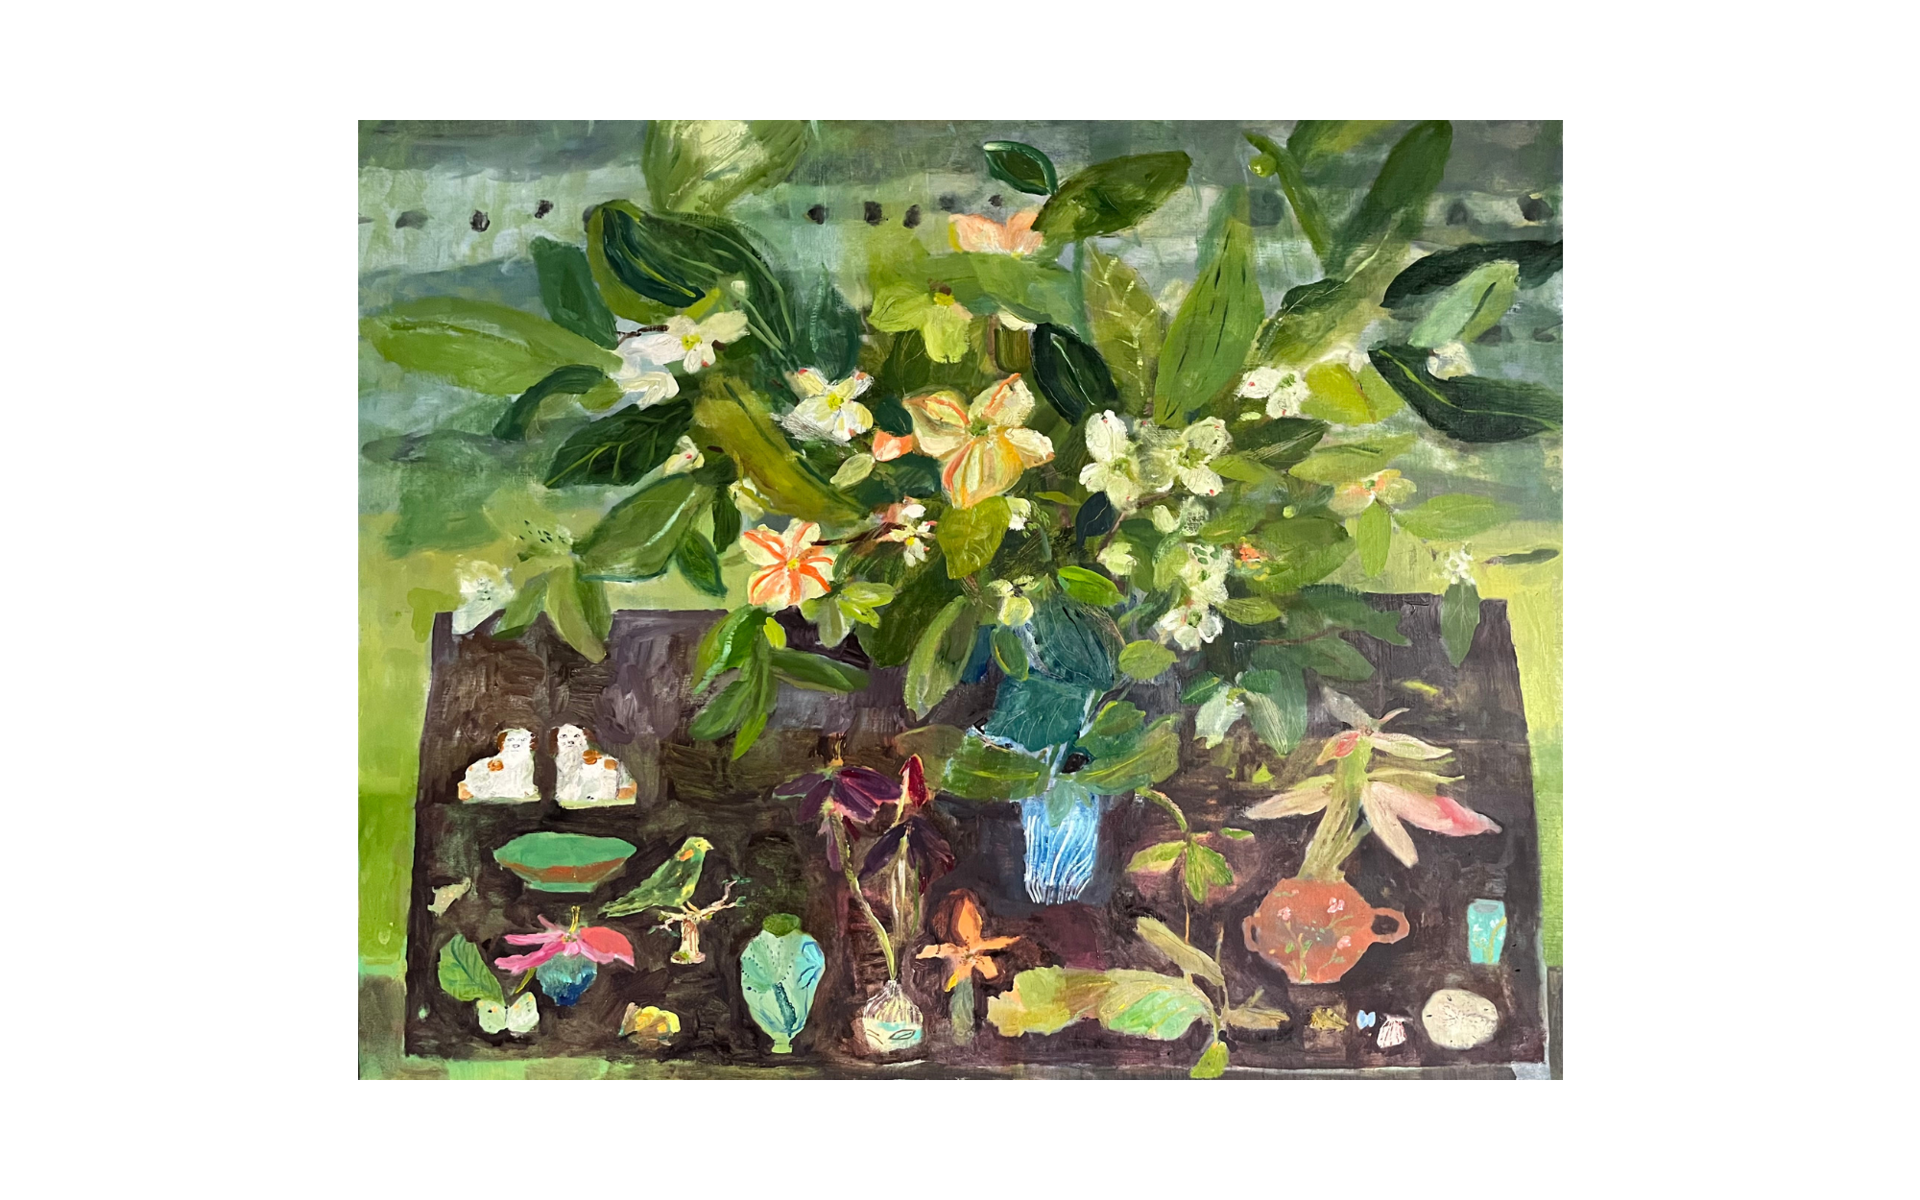 Gathered greens by LIZ ENDRES